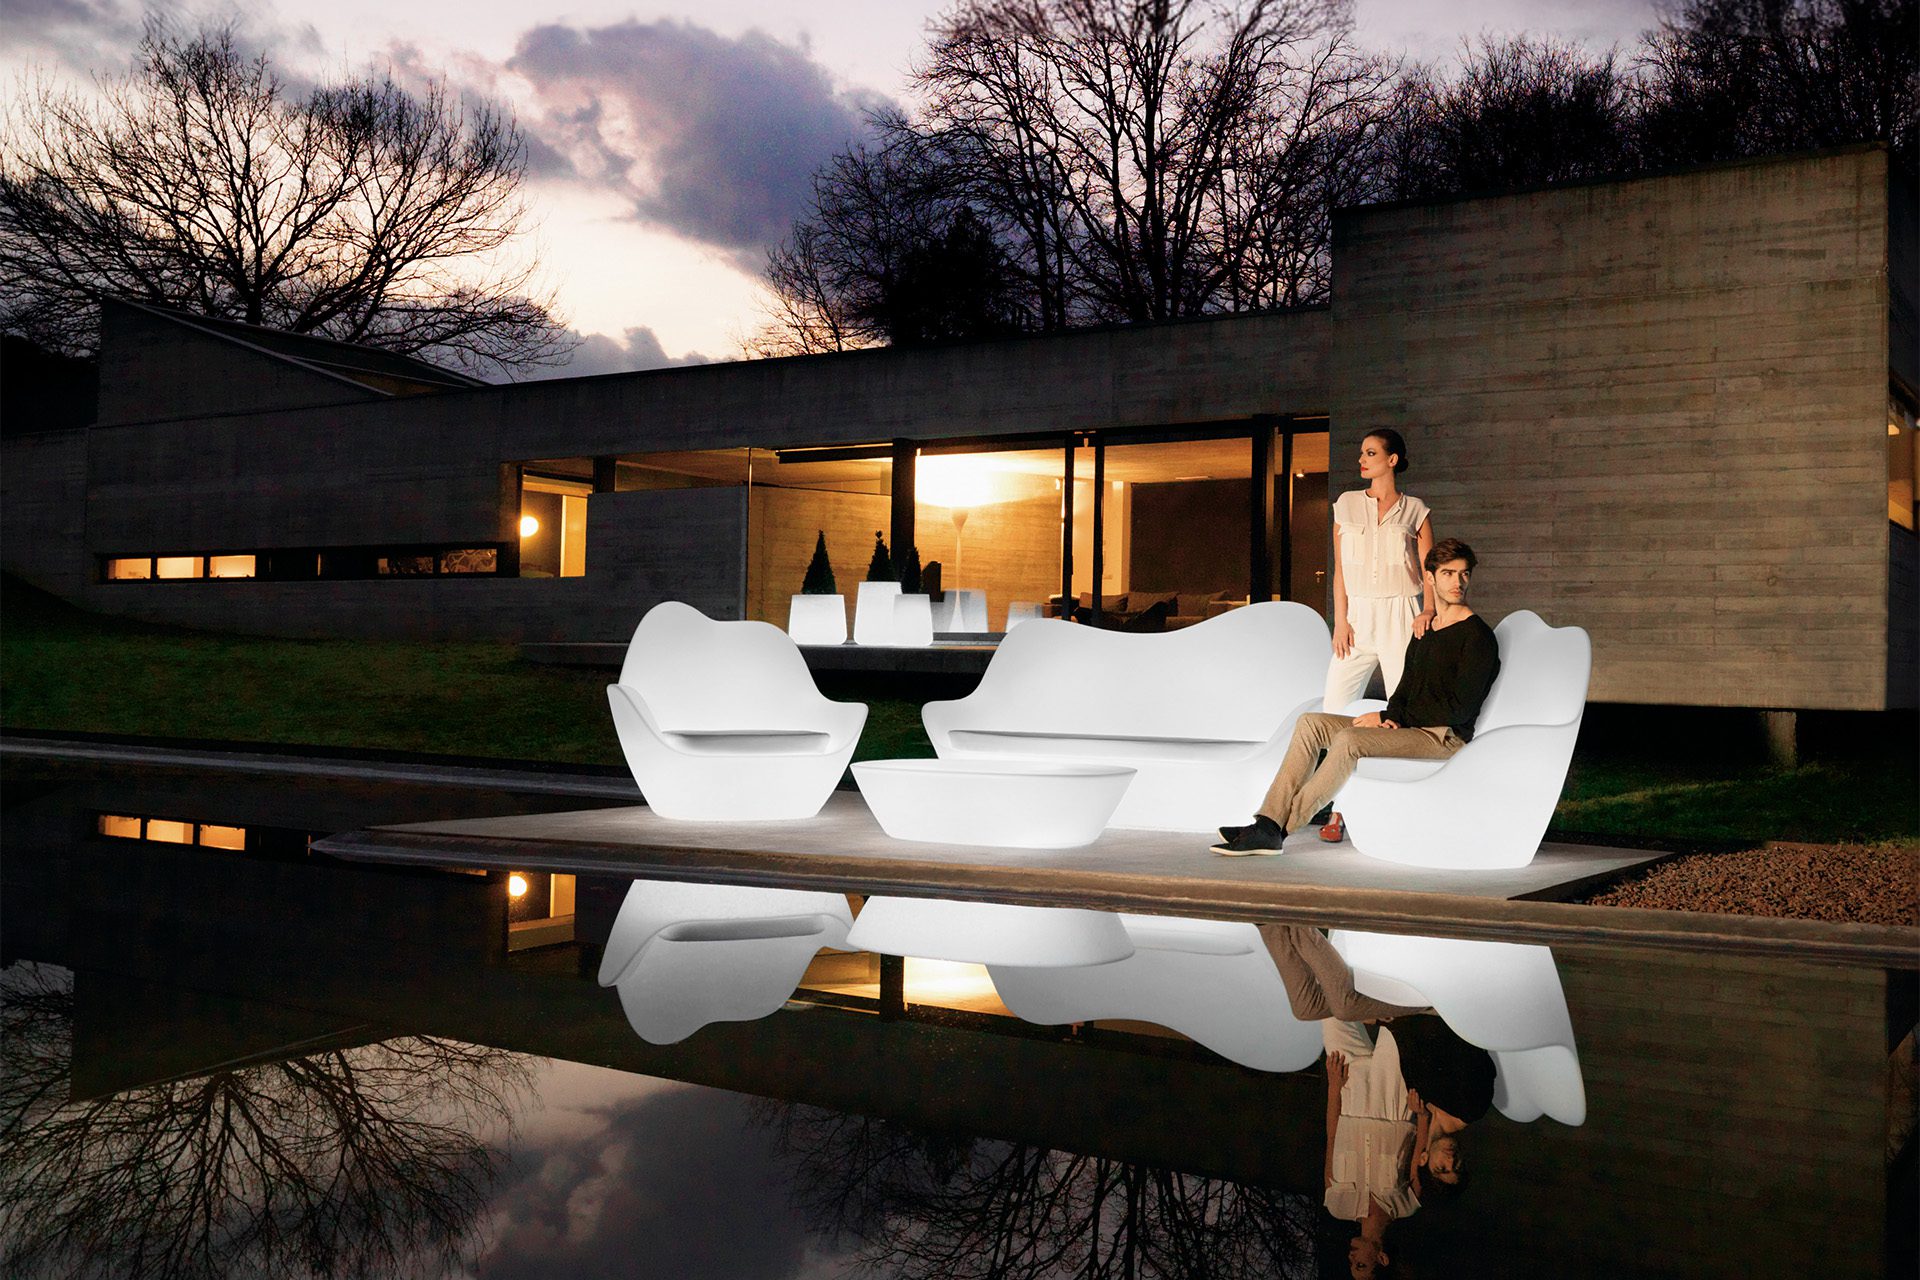 Sabinas outdoor furniture collection by Javier Mariscal